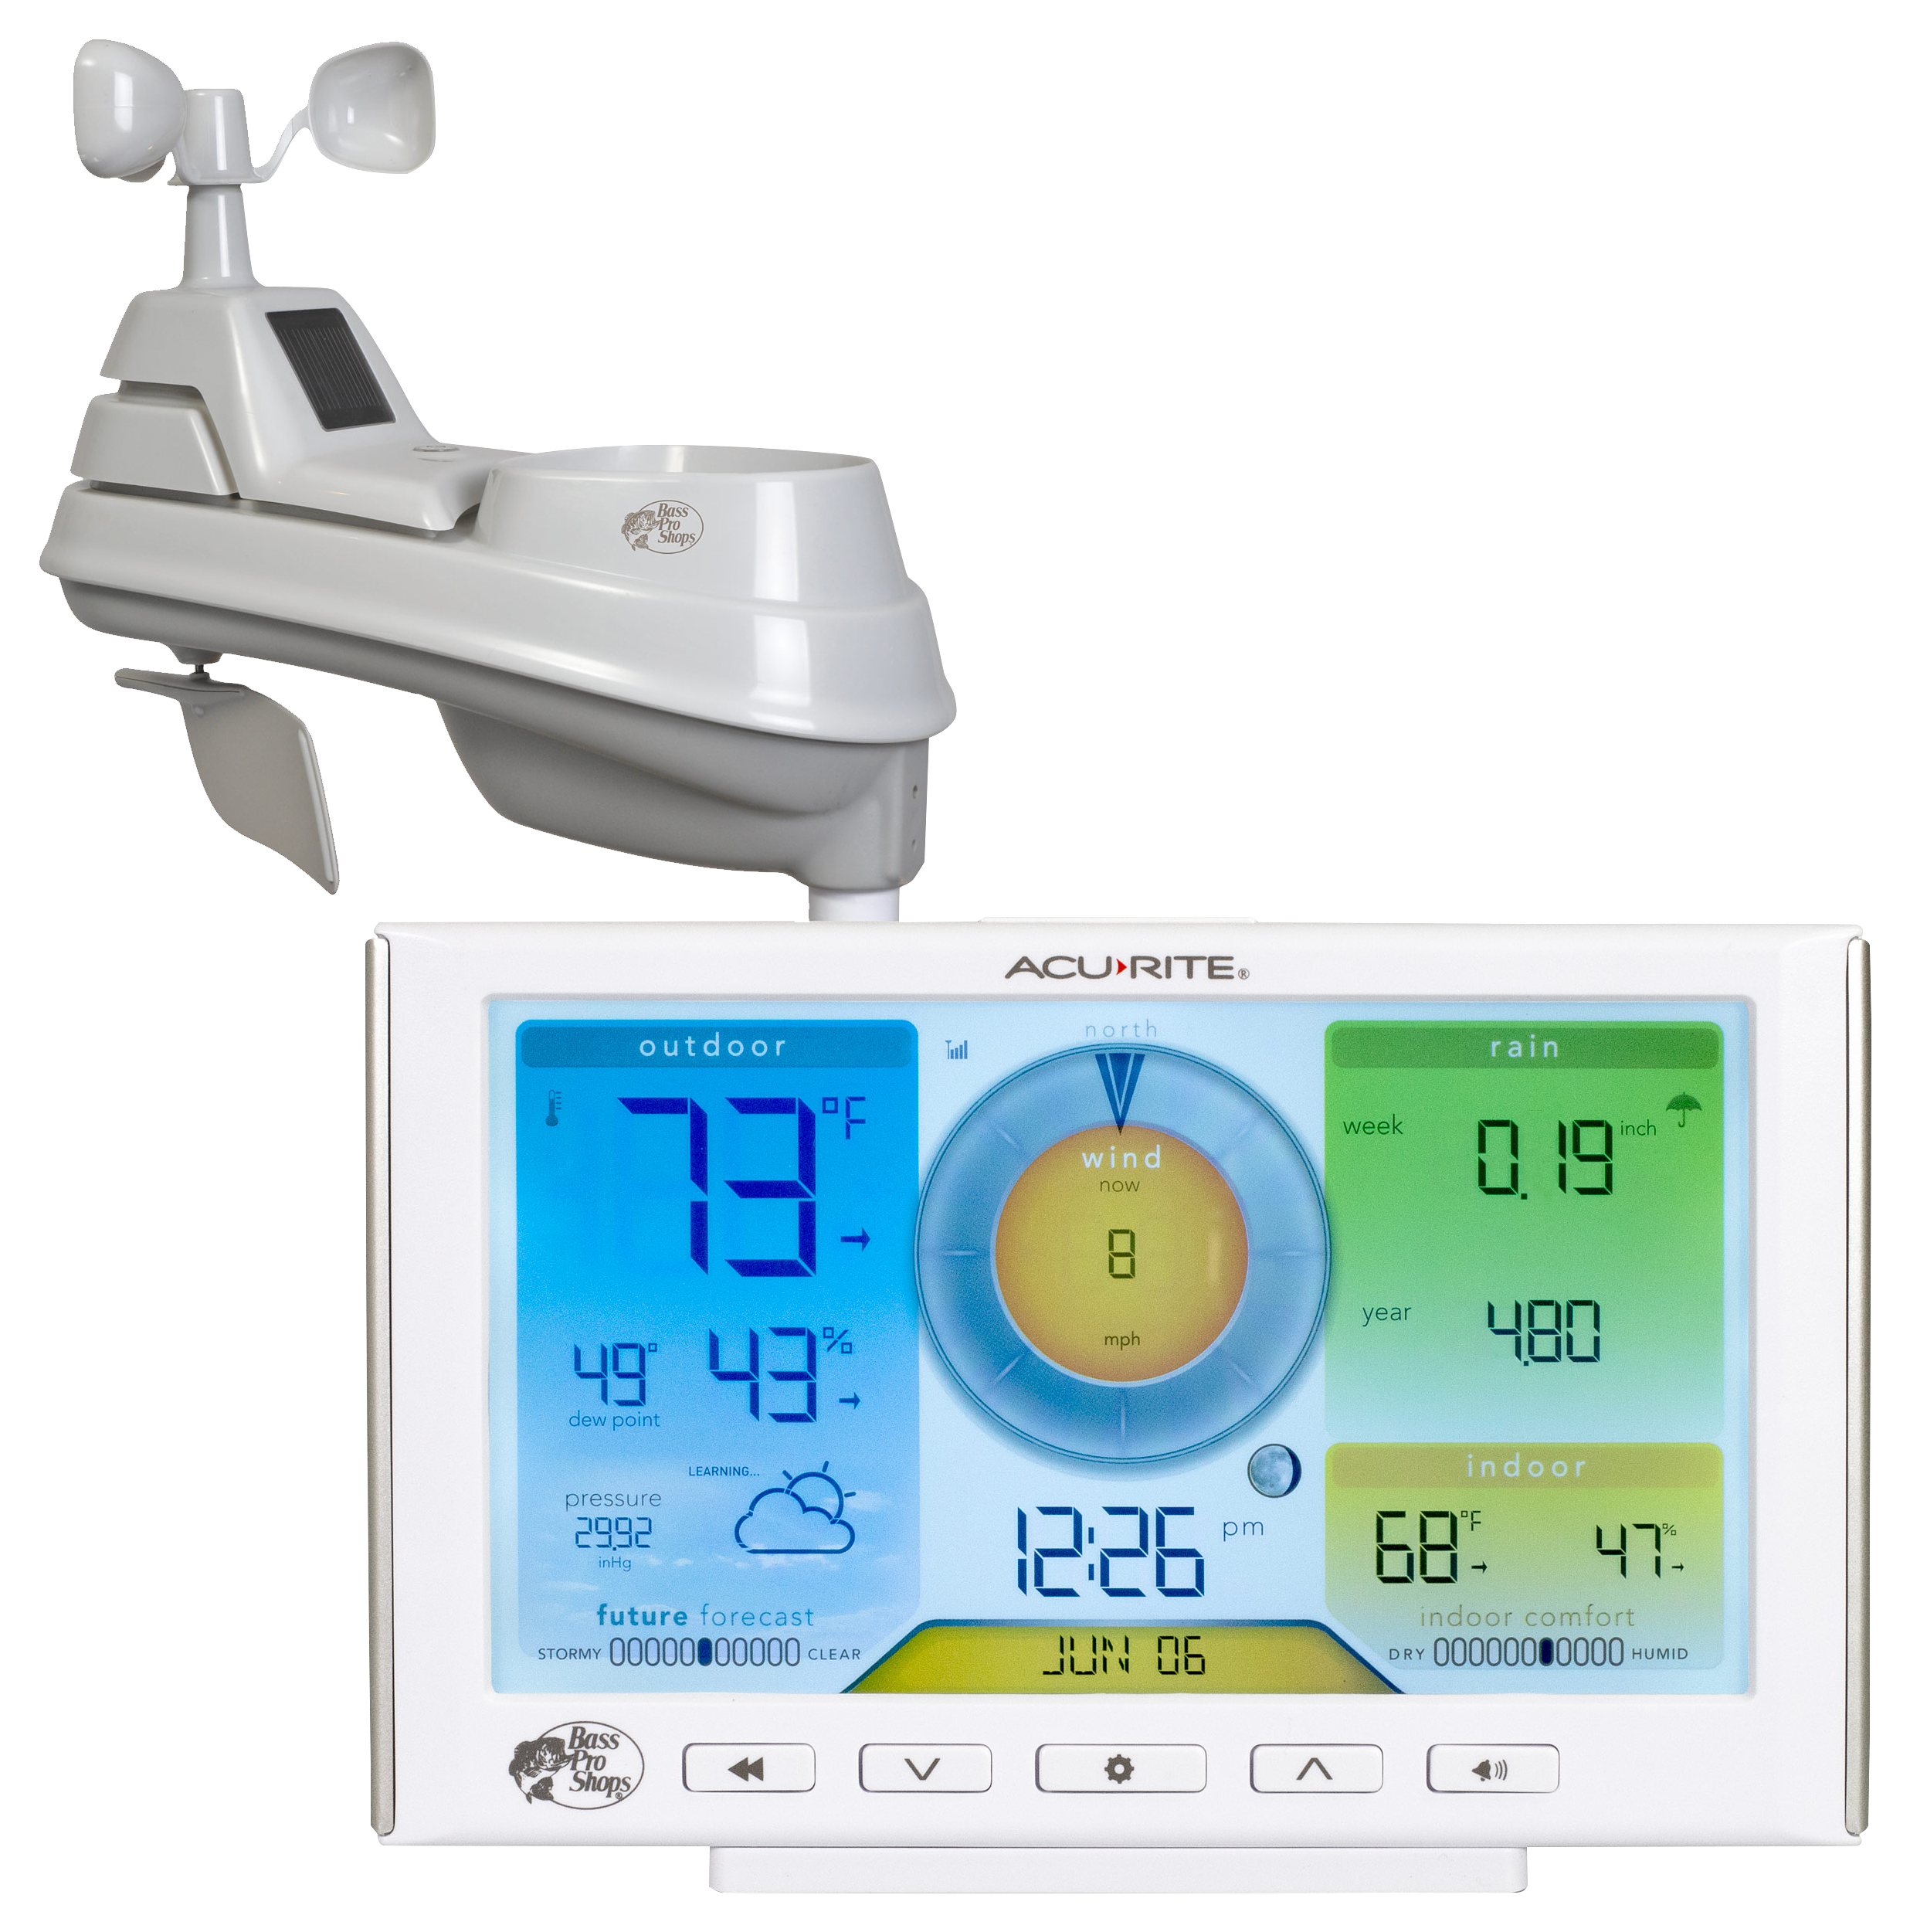 Bass Pro Shops AcuRite Iris Weather Station with Color Display